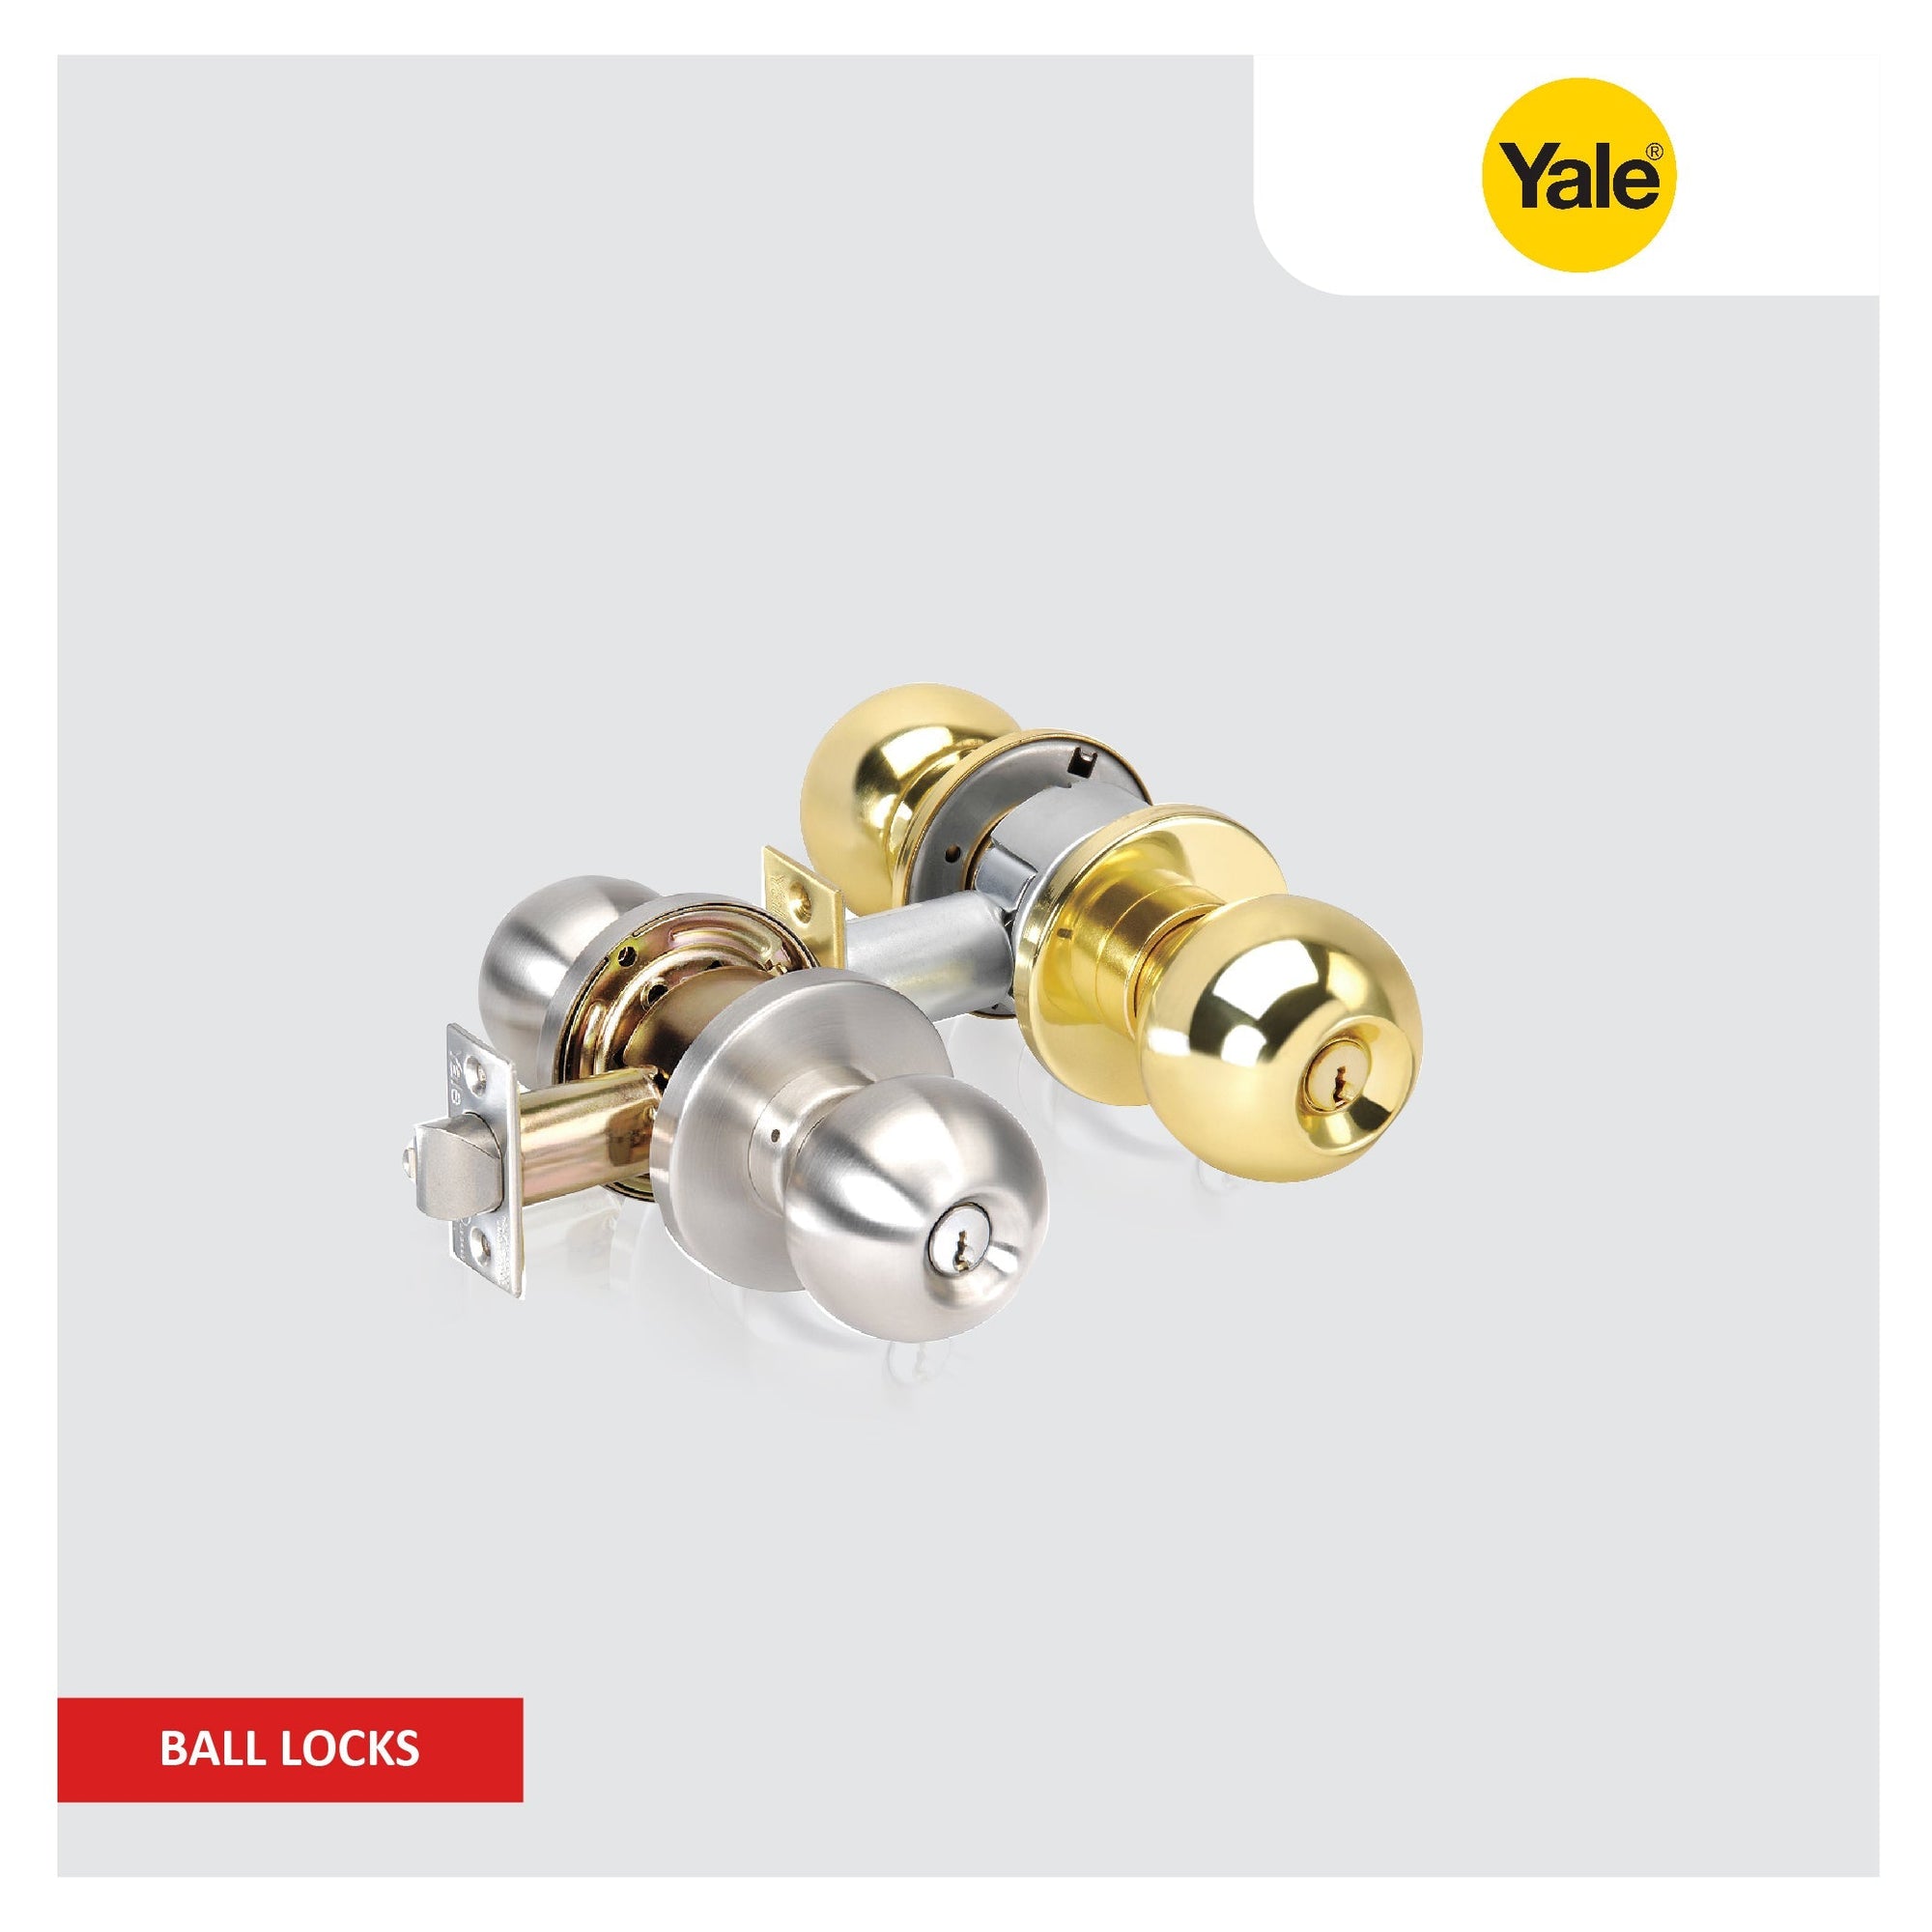 Yale Ball Locks - A close-up image of a Yale ball lock, showcasing its sturdy construction and key-operated mechanism.